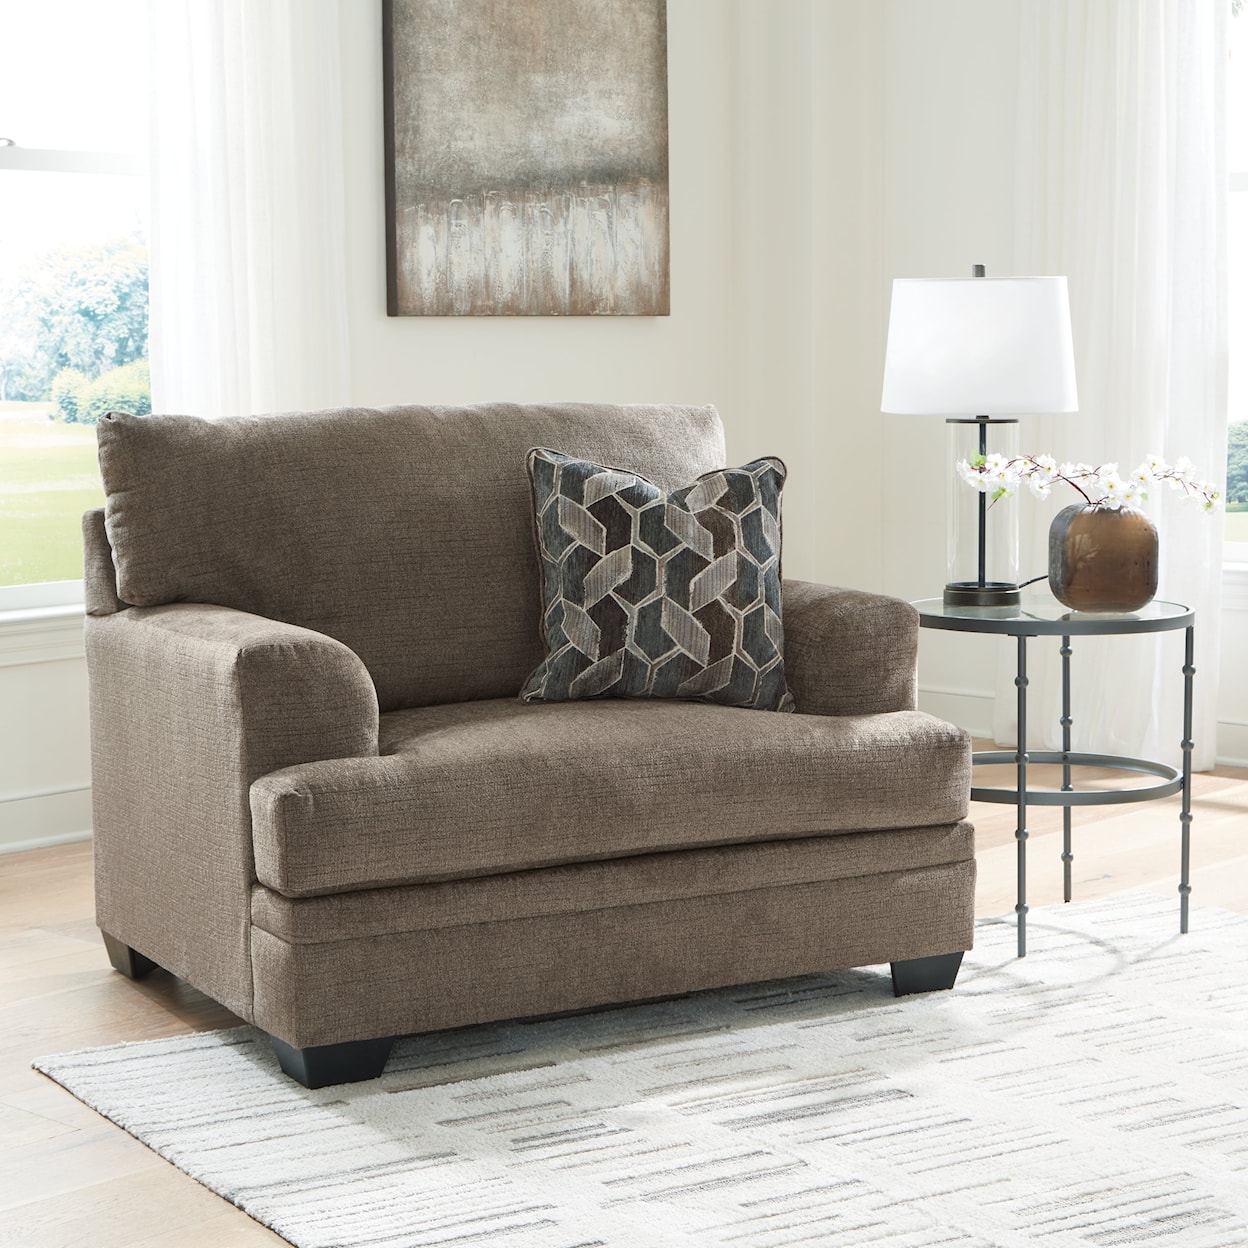 Signature Design by Ashley Furniture Stonemeade Oversized Chair